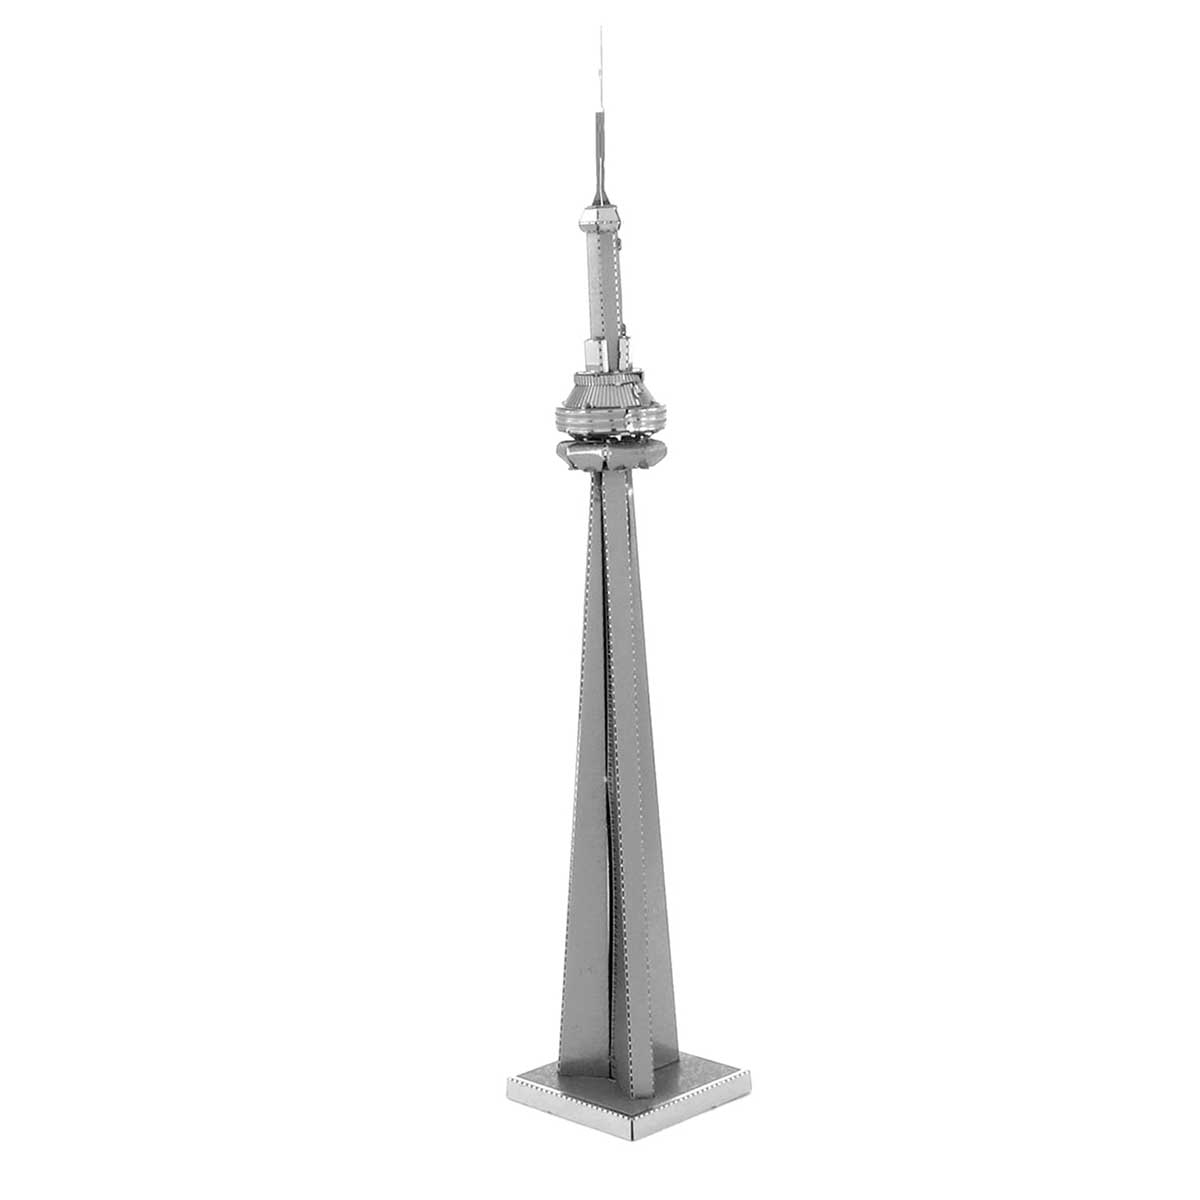 CN Tower Landmarks / Monuments Metal Puzzles